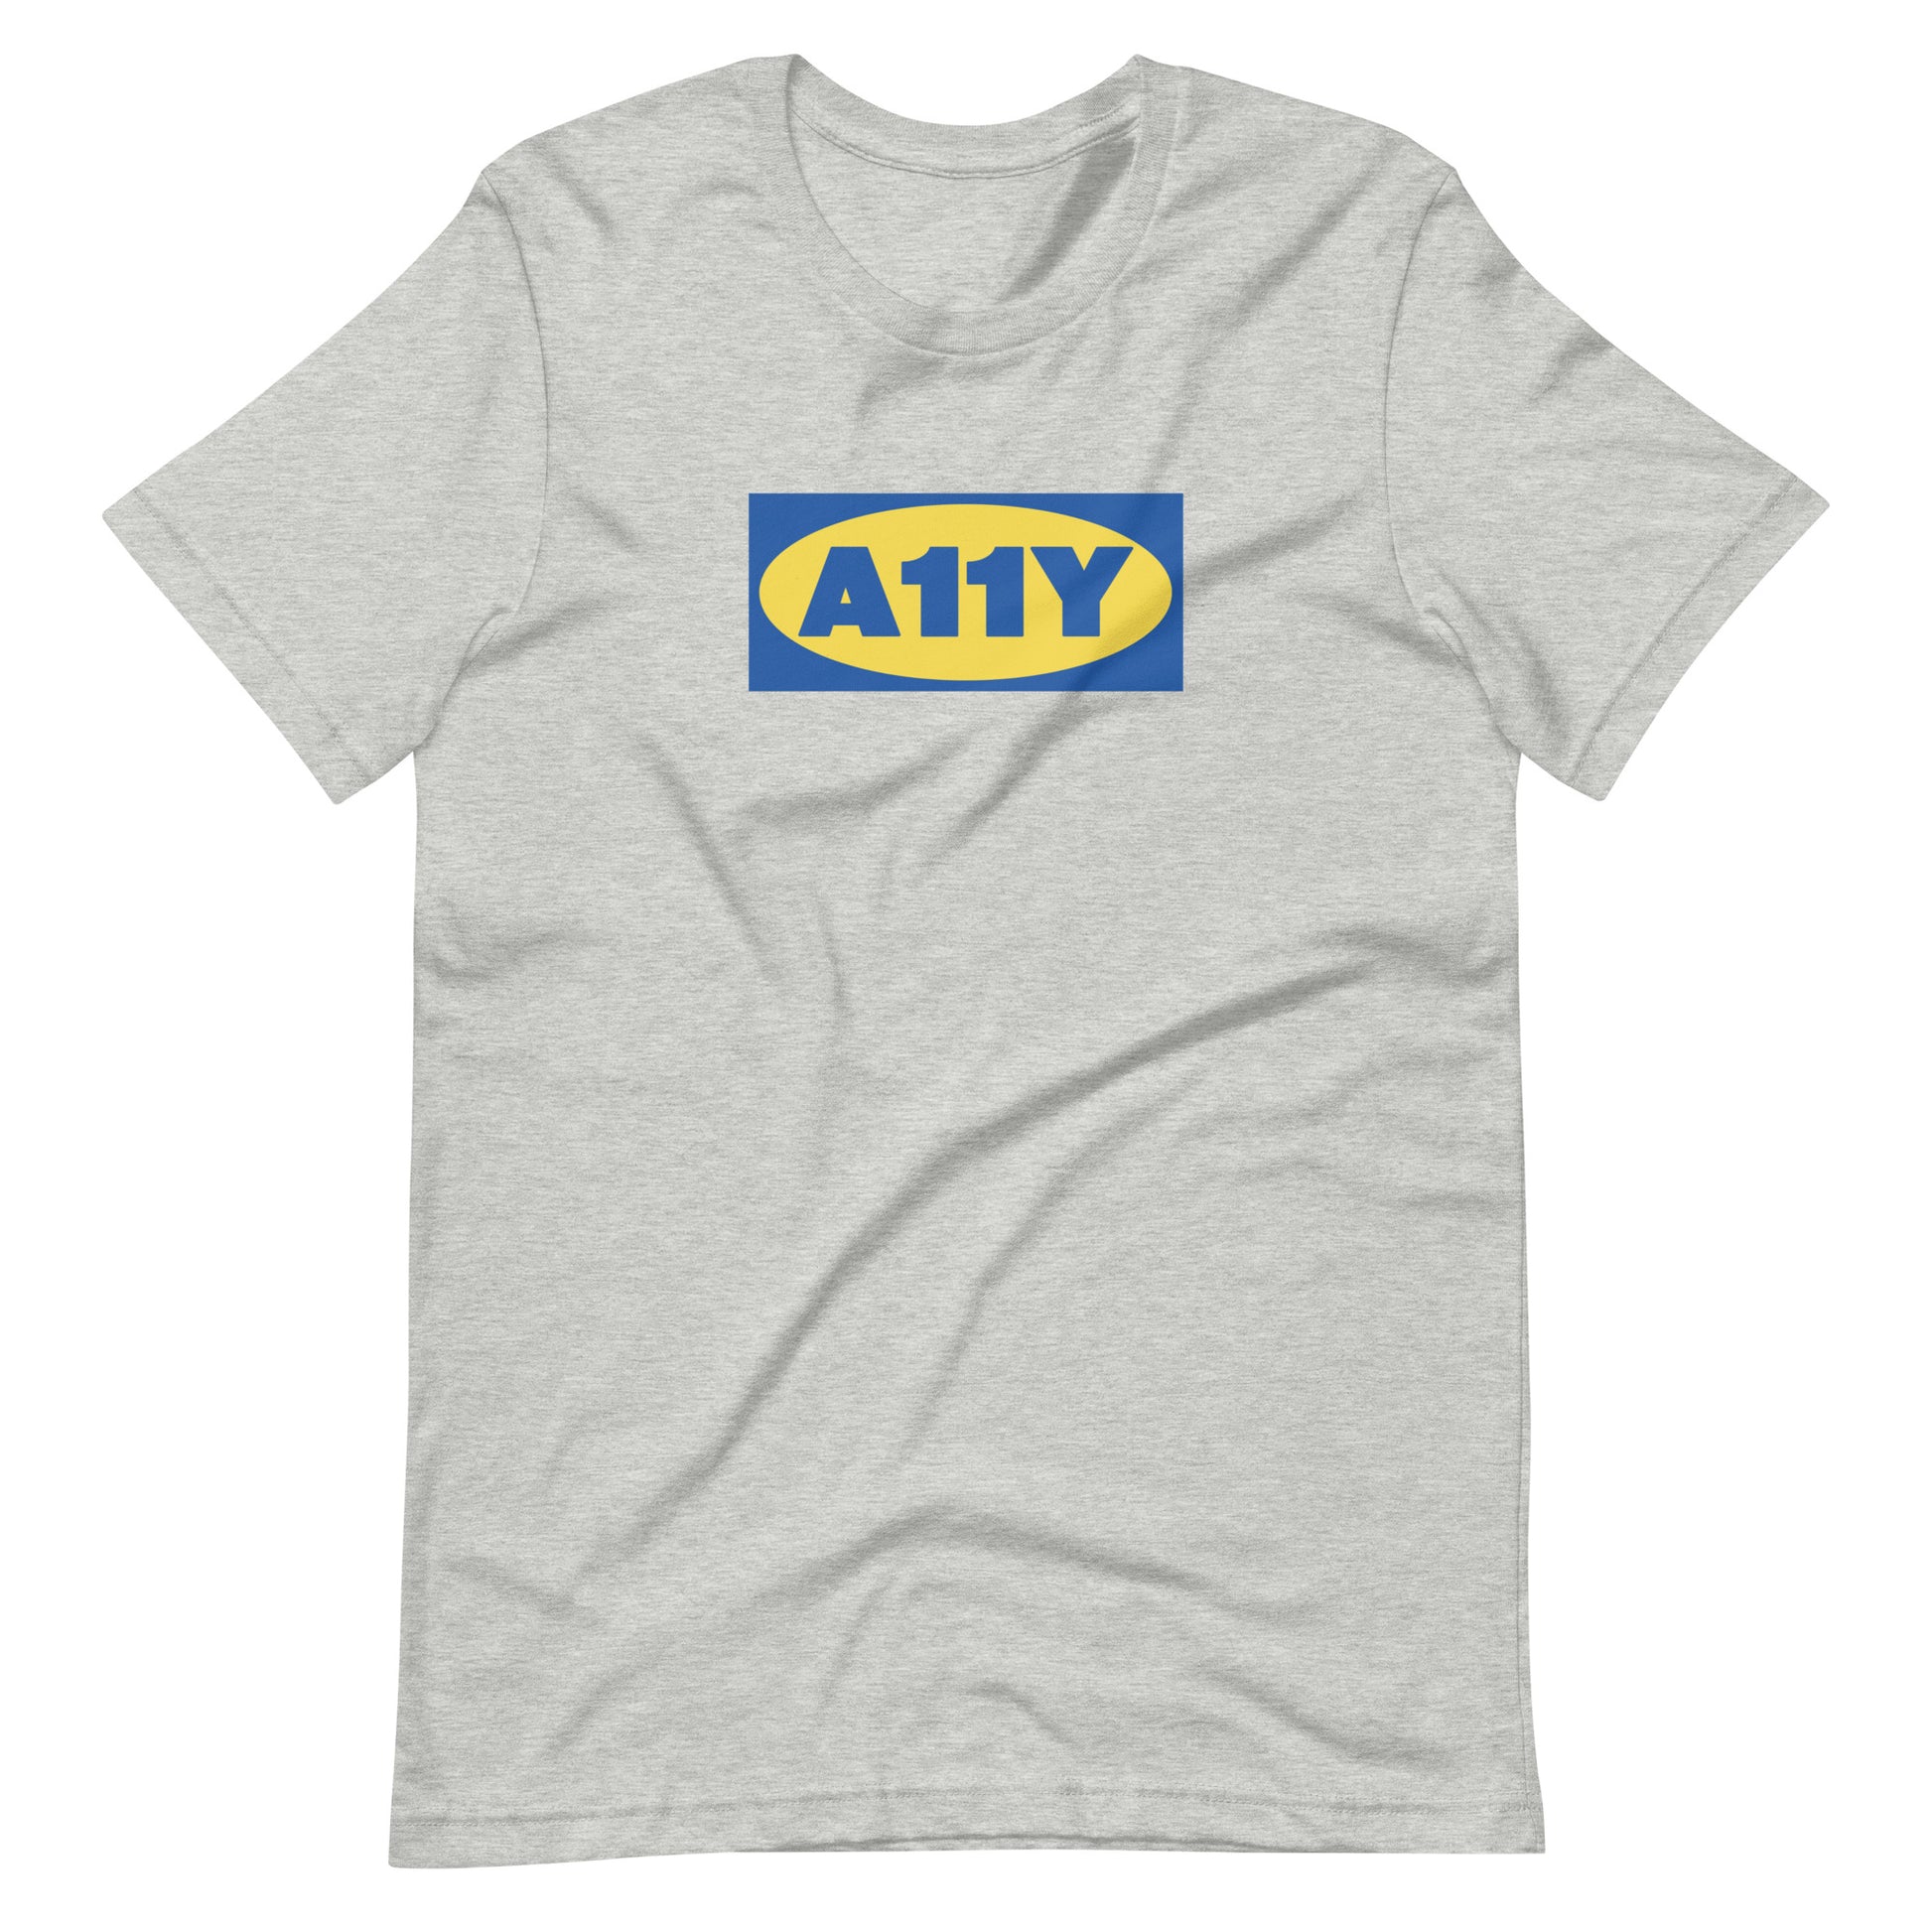 Thick blue A11y letters, on top of a yellow oval, on top of a blue rectangle. Remicent of the Ikea logo. Center aligned on front of a heather grey t-shirt.